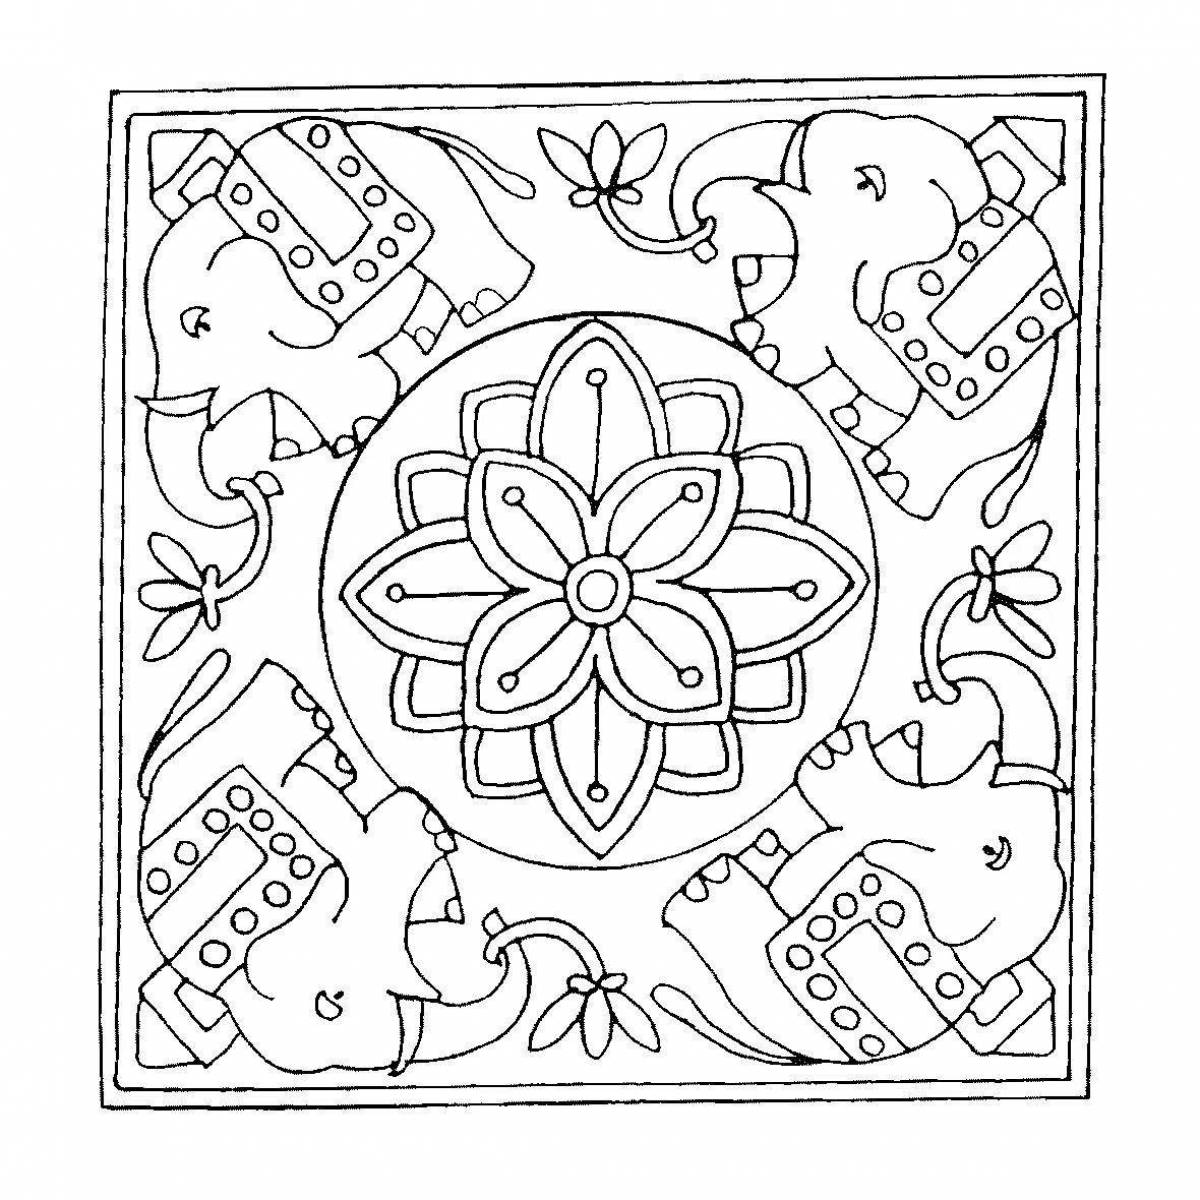 Complex tiles for coloring pages